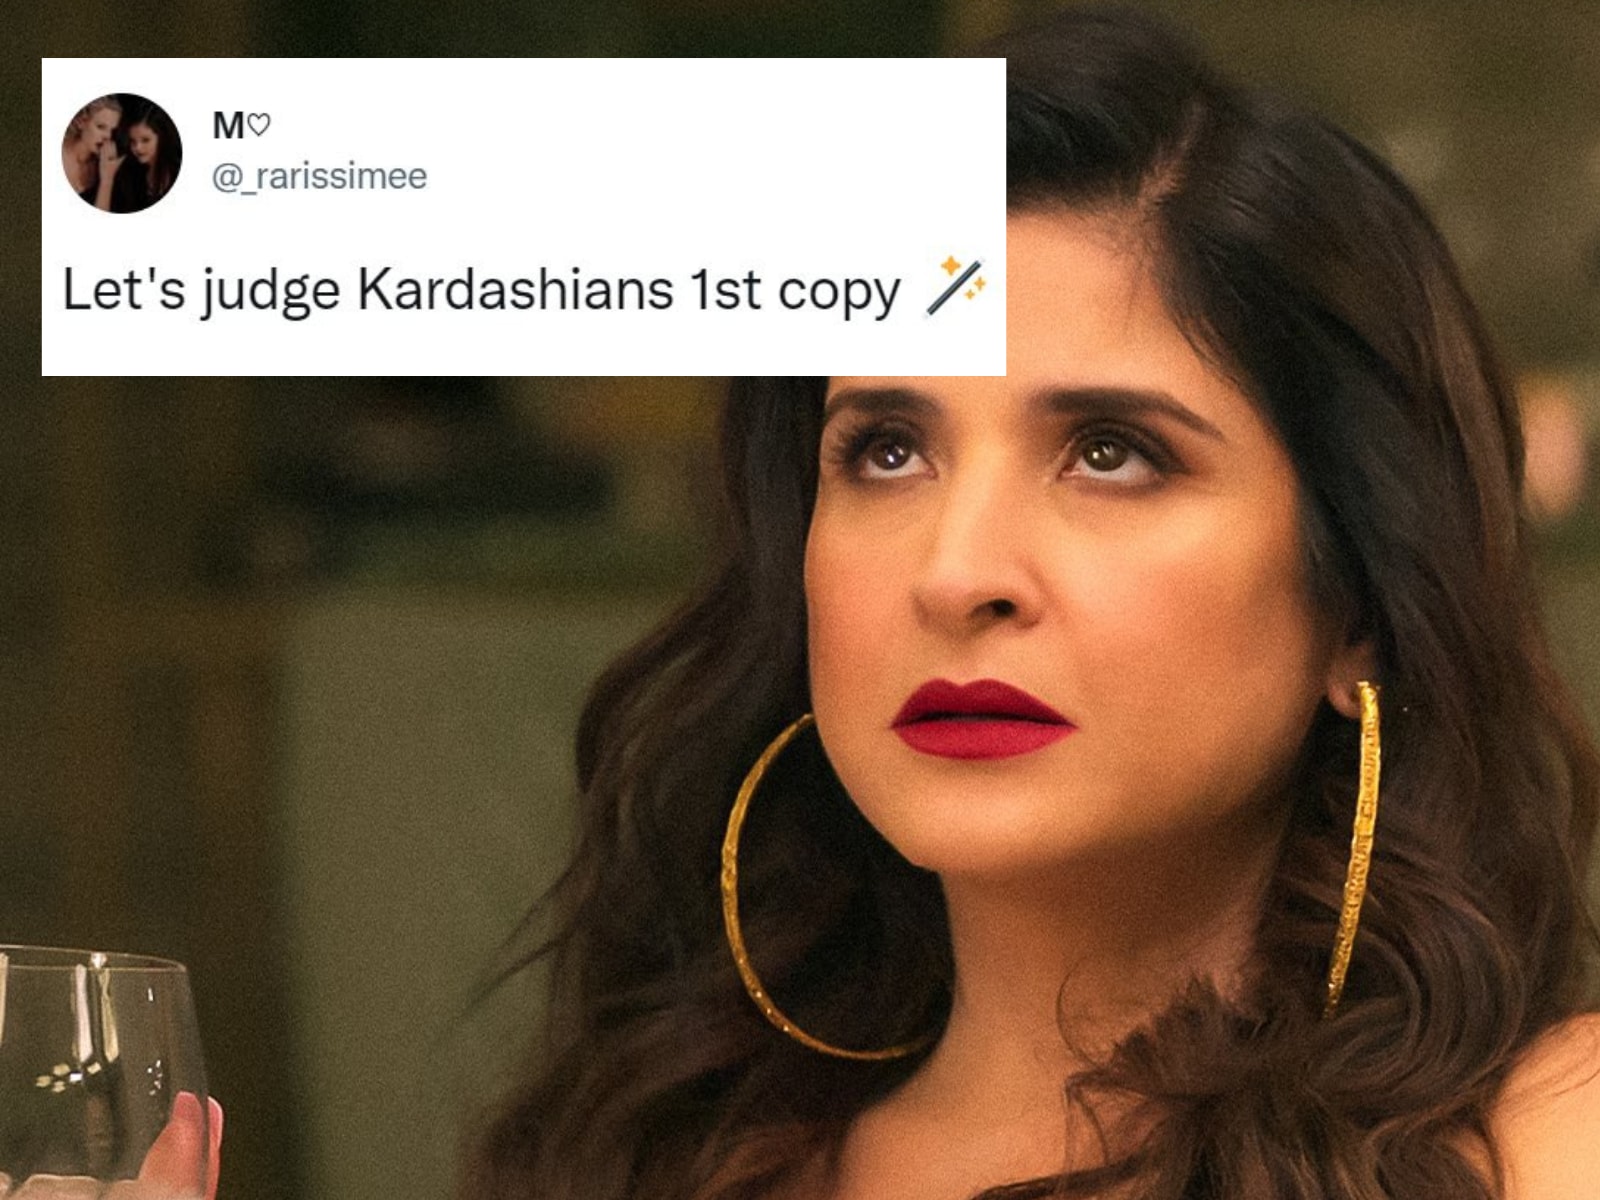 Fabulous Lives of Bollywood Wives Season 2 Has Twitter Bringing Out the Popcorn Once More